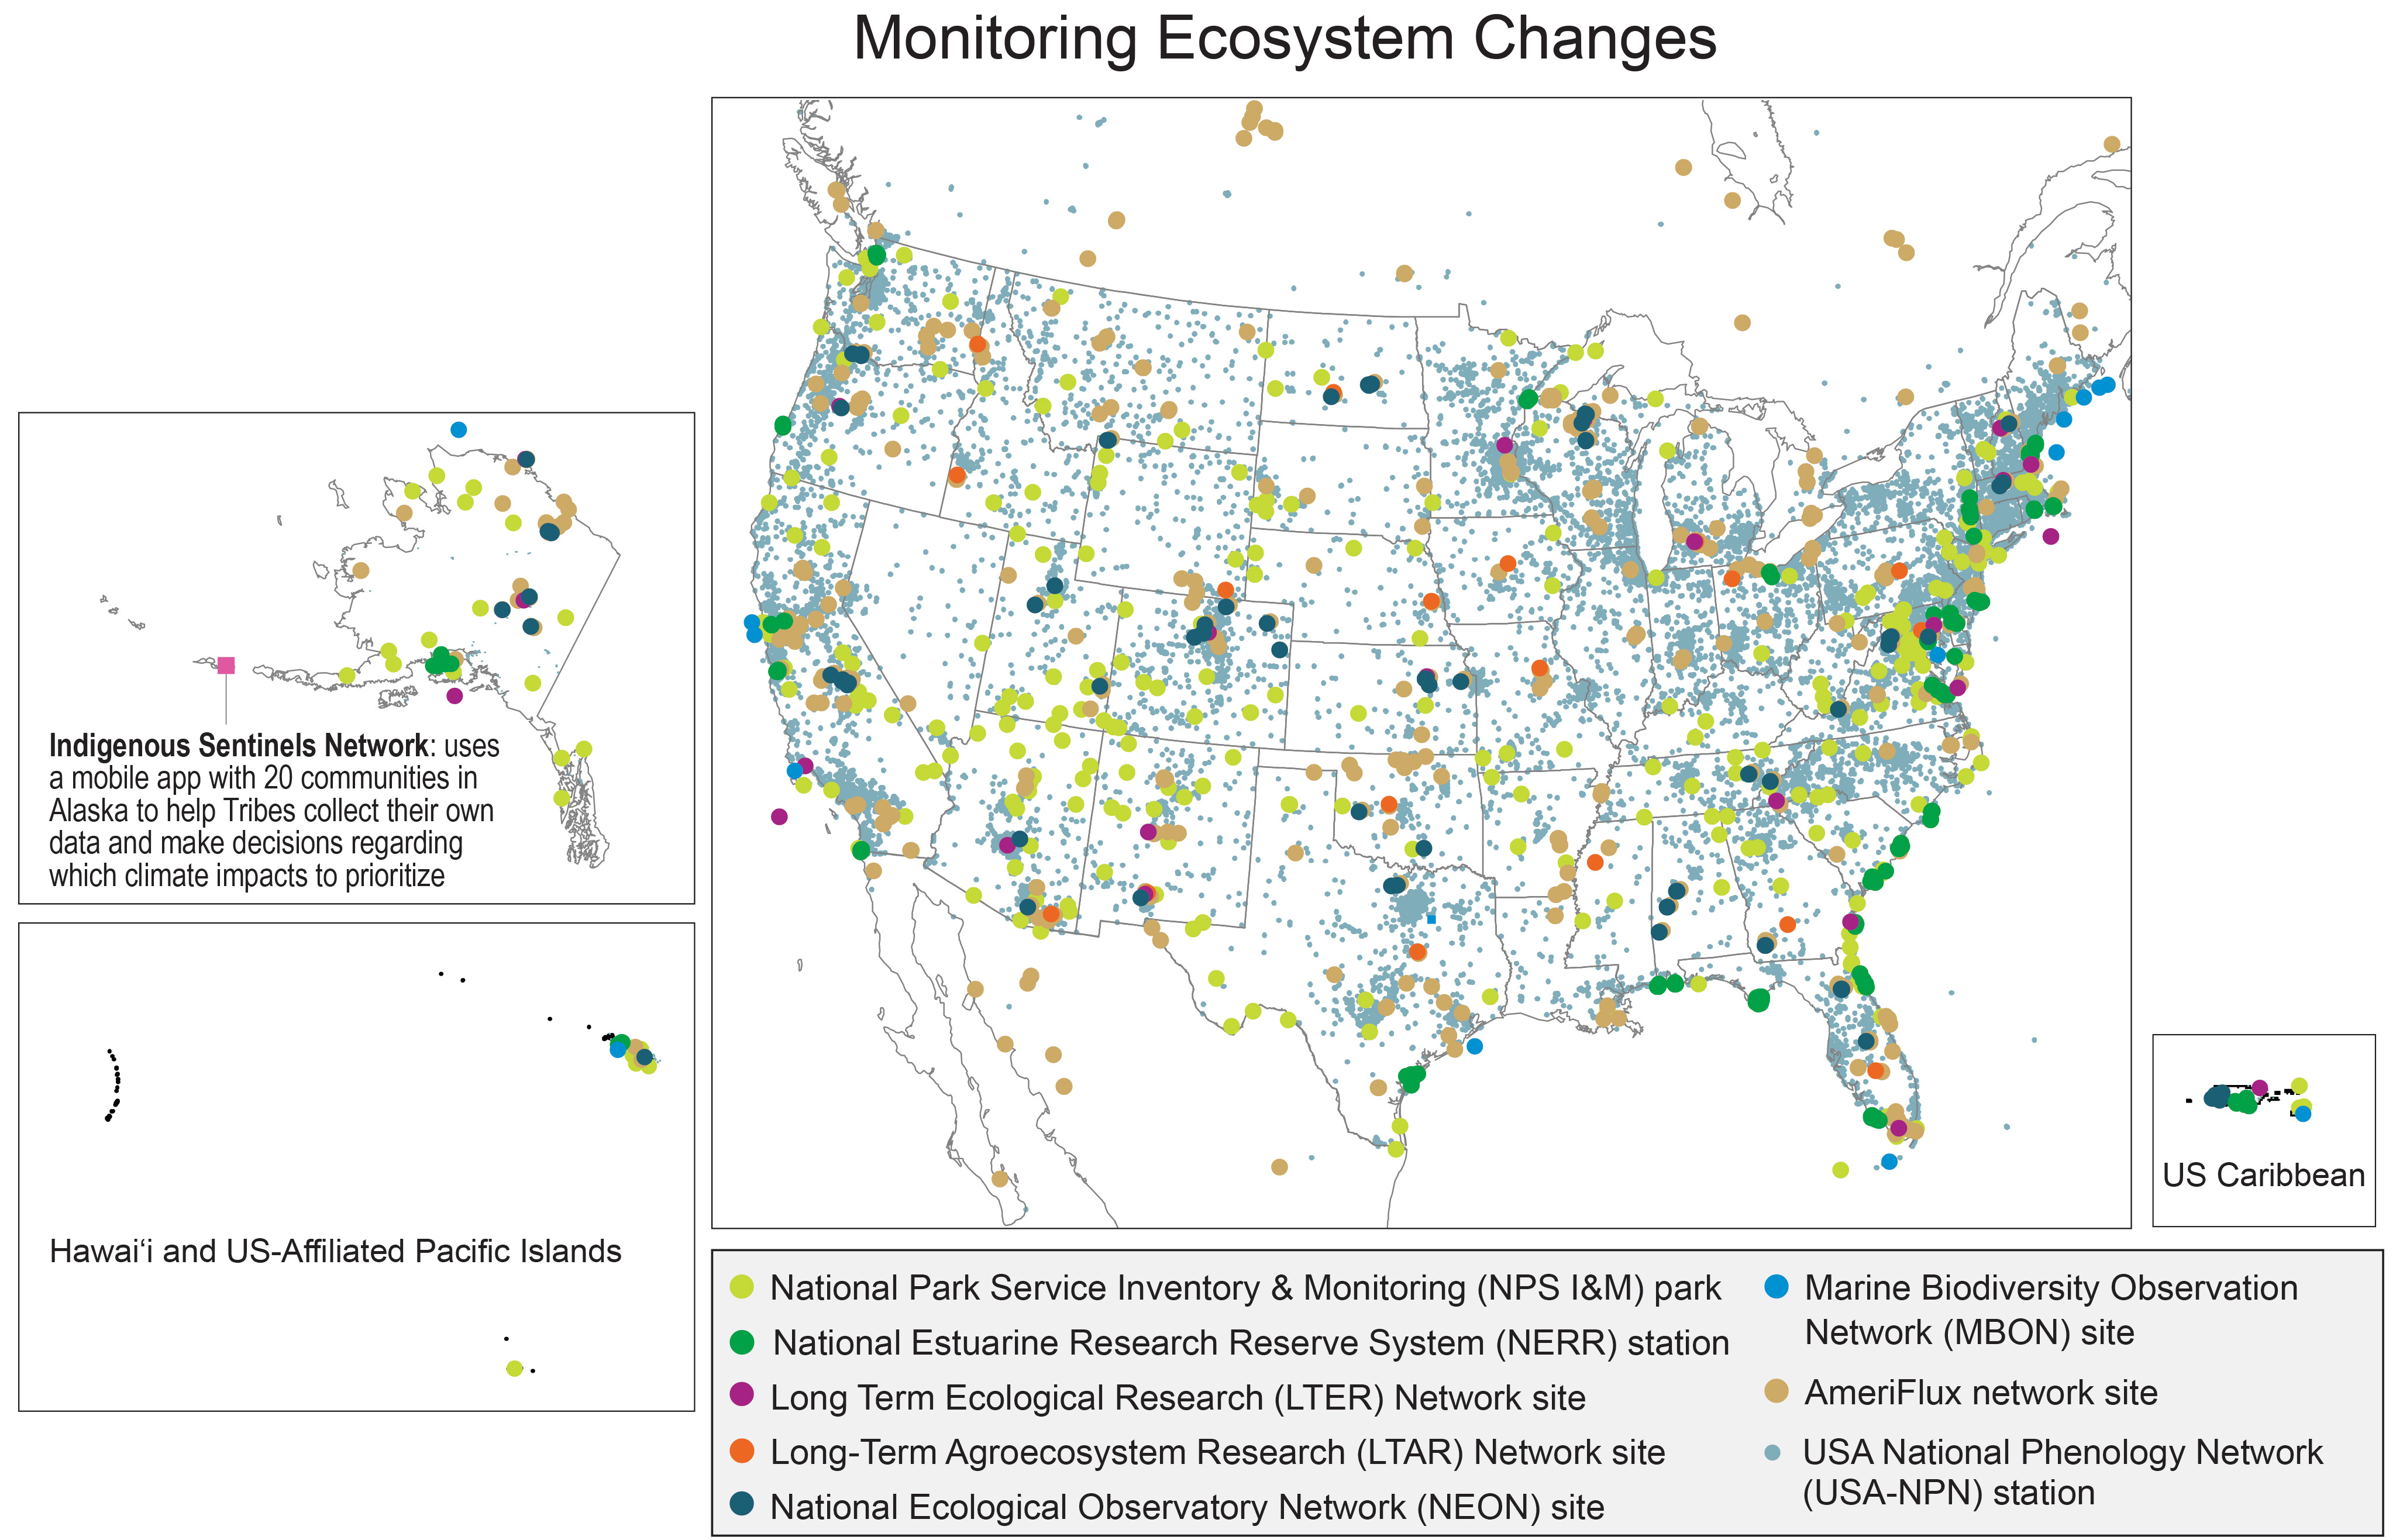 Map showing locations of monitoring programs across US